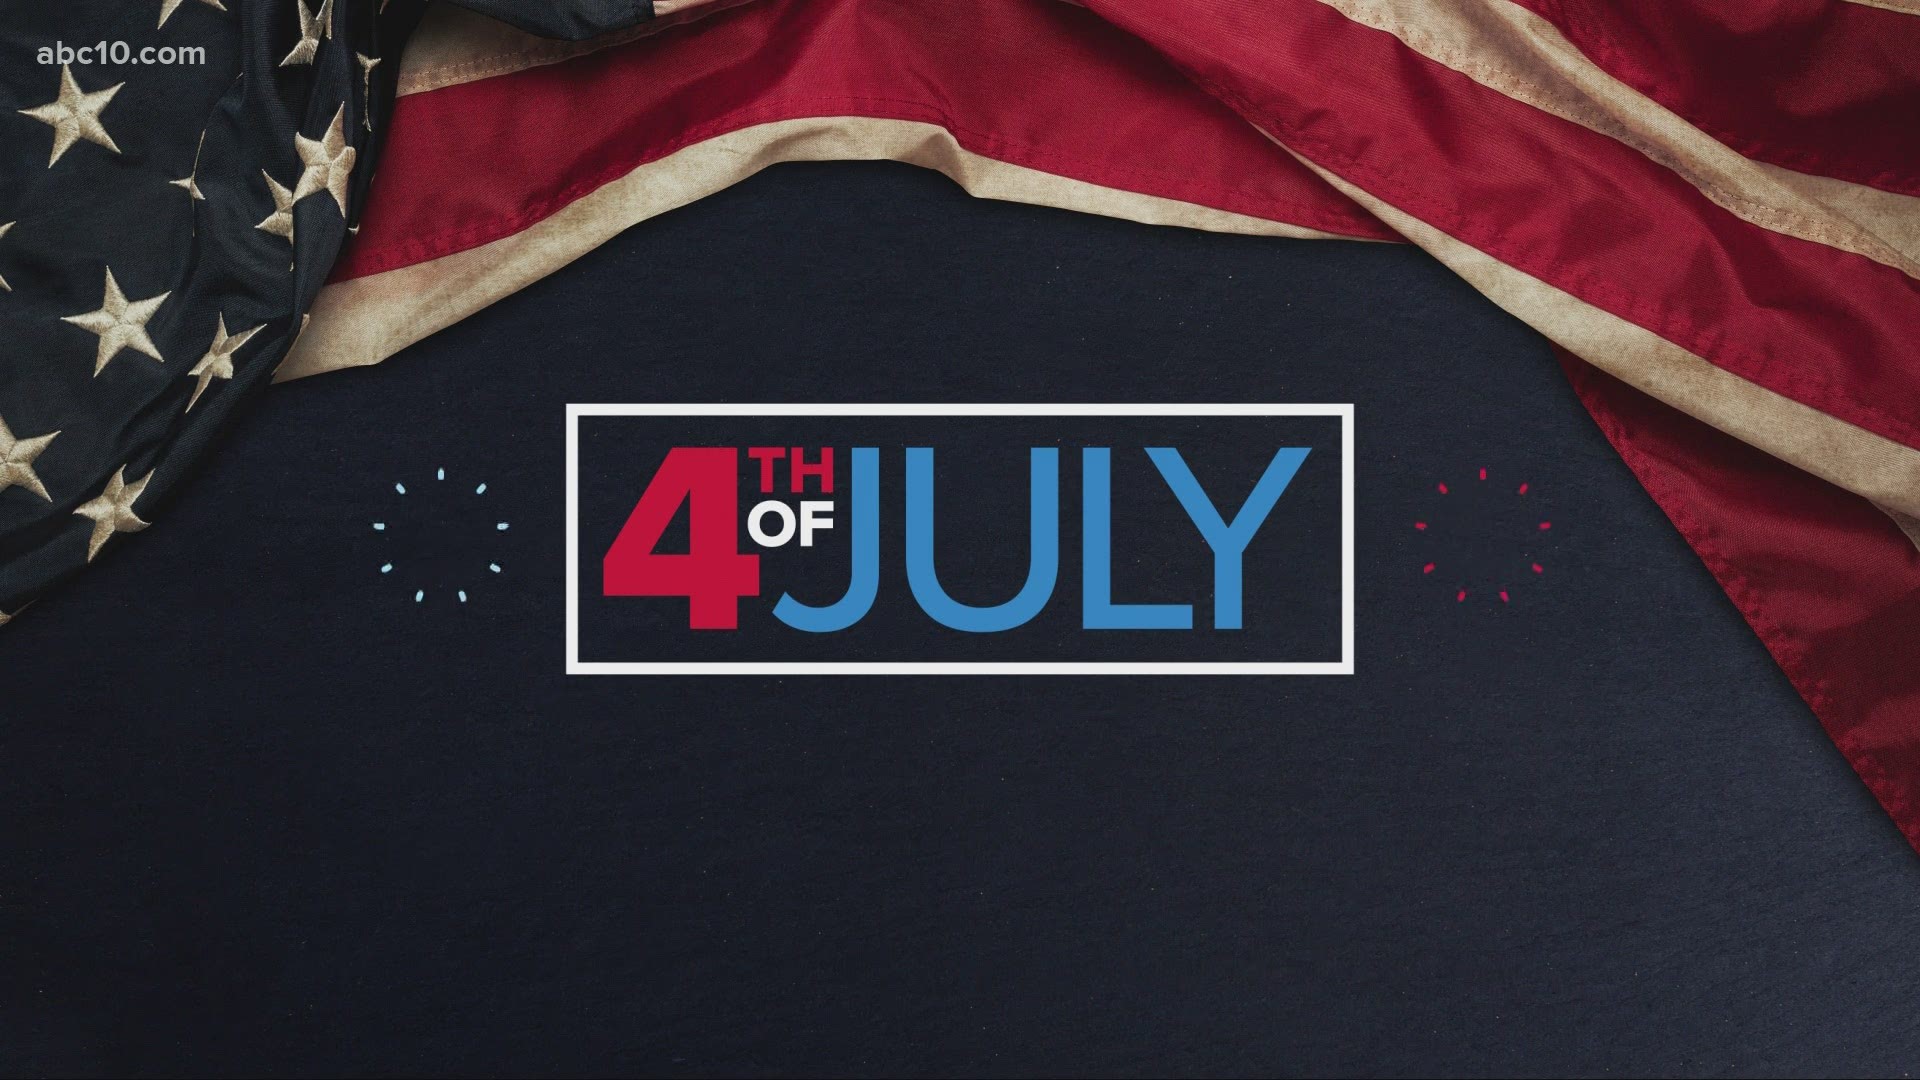 Zach Fuentes spoke to community members about what the fourth of July means to them.